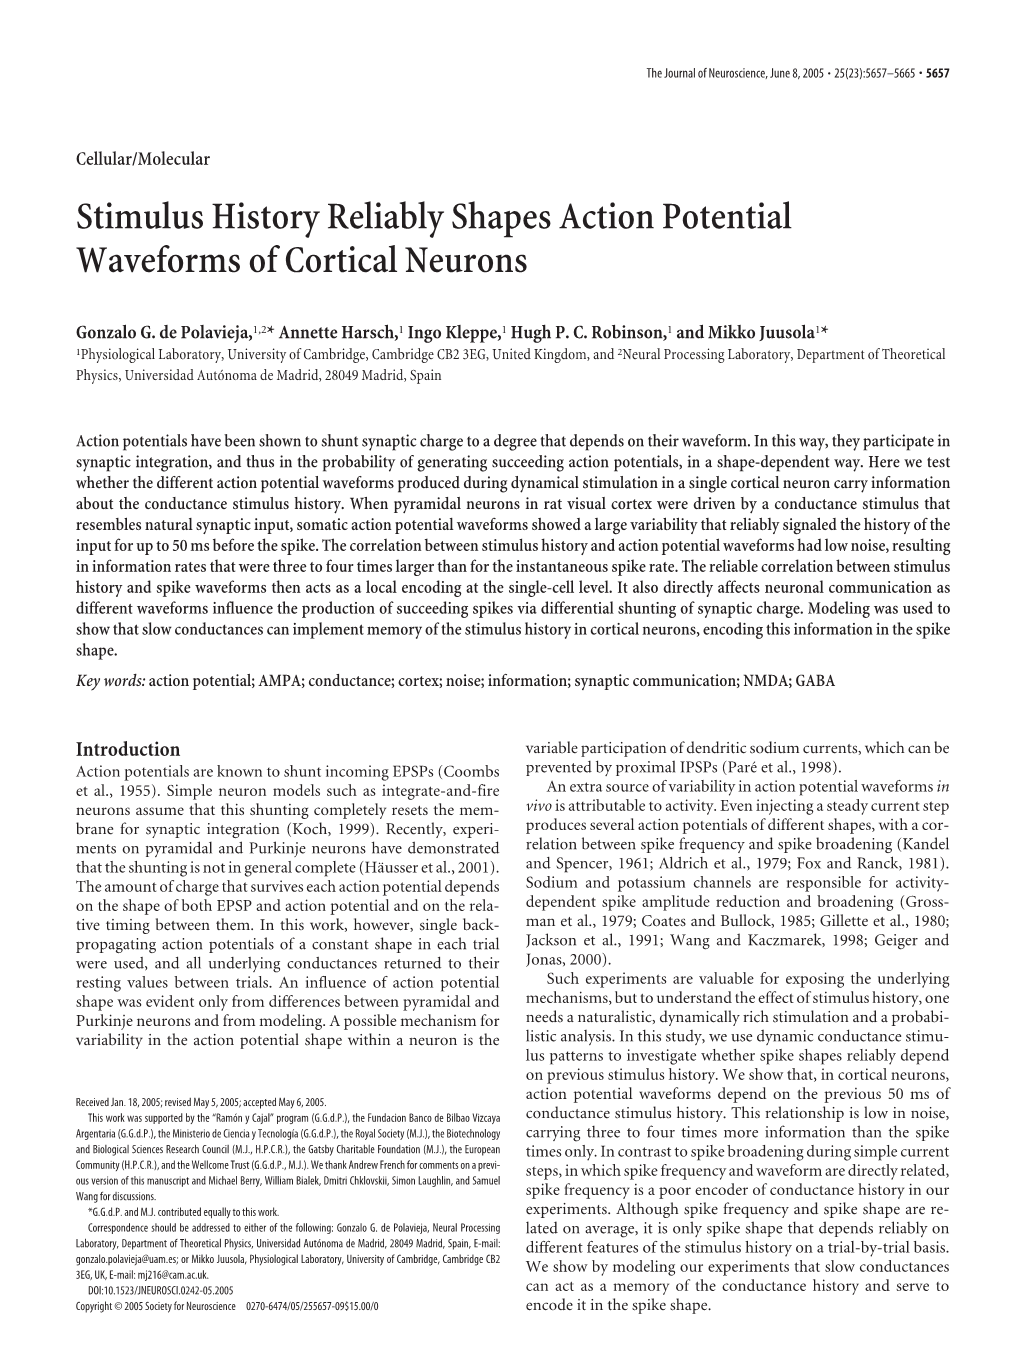 Stimulus History Reliably Shapes Action Potential Waveforms of Cortical Neurons